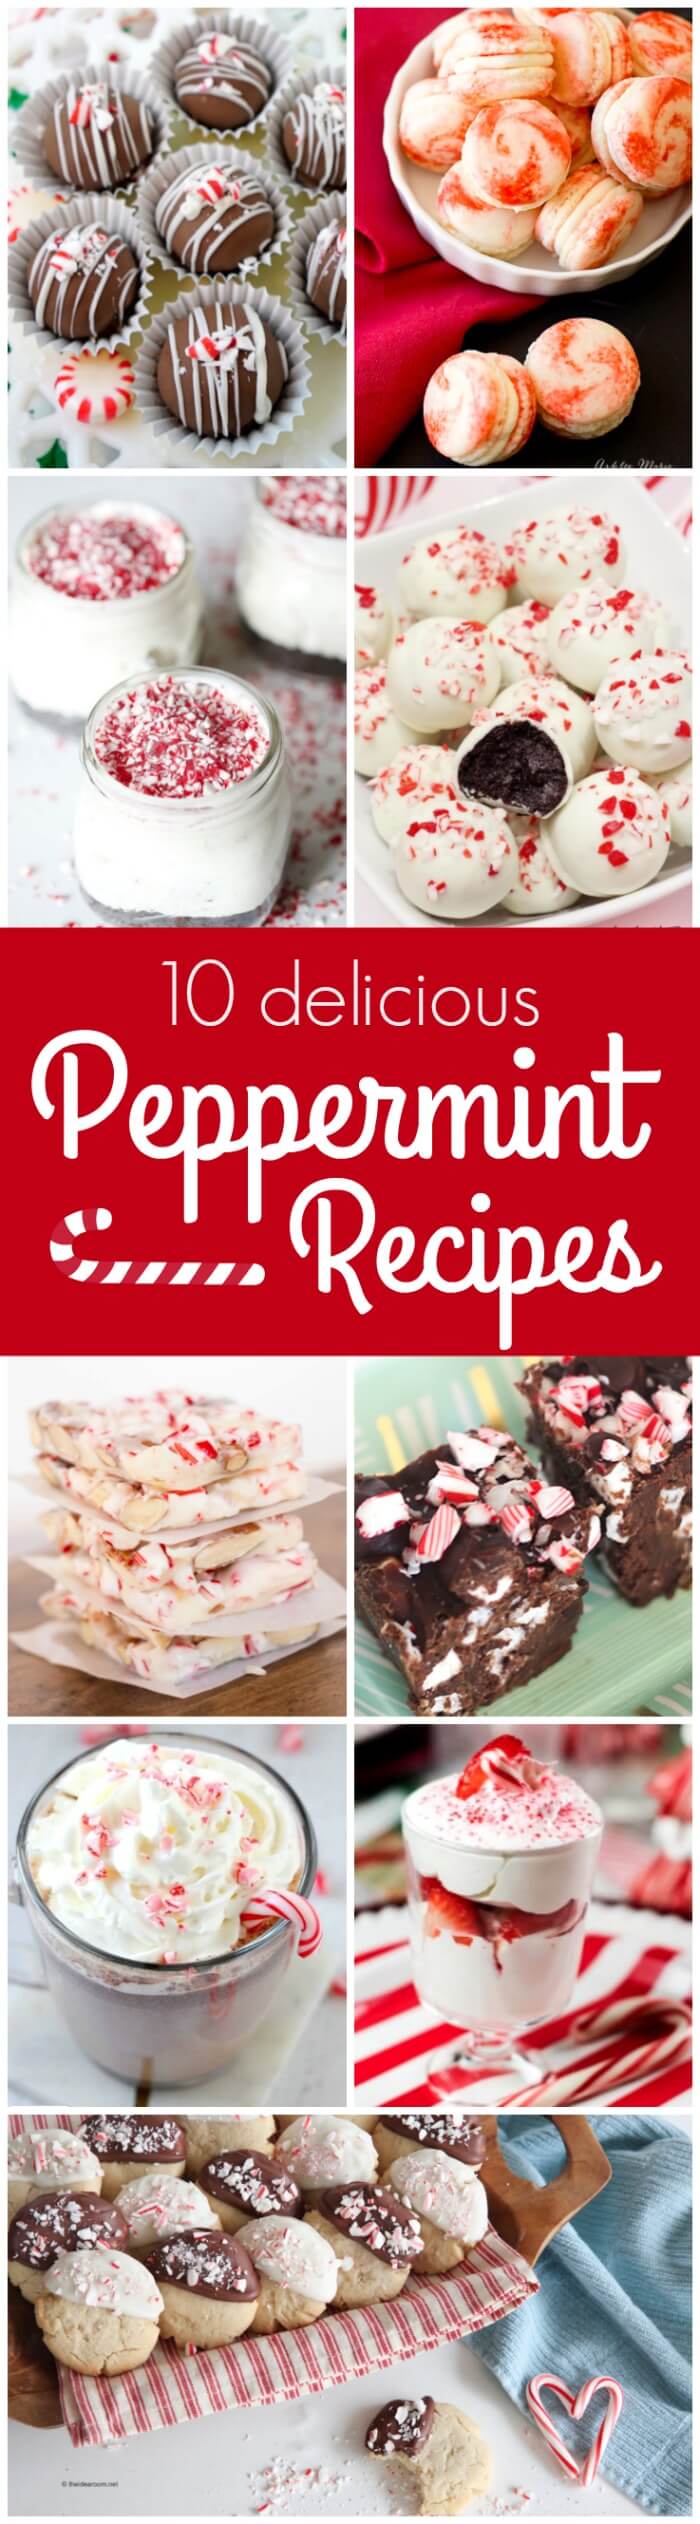 10 delicious peppermint recipes